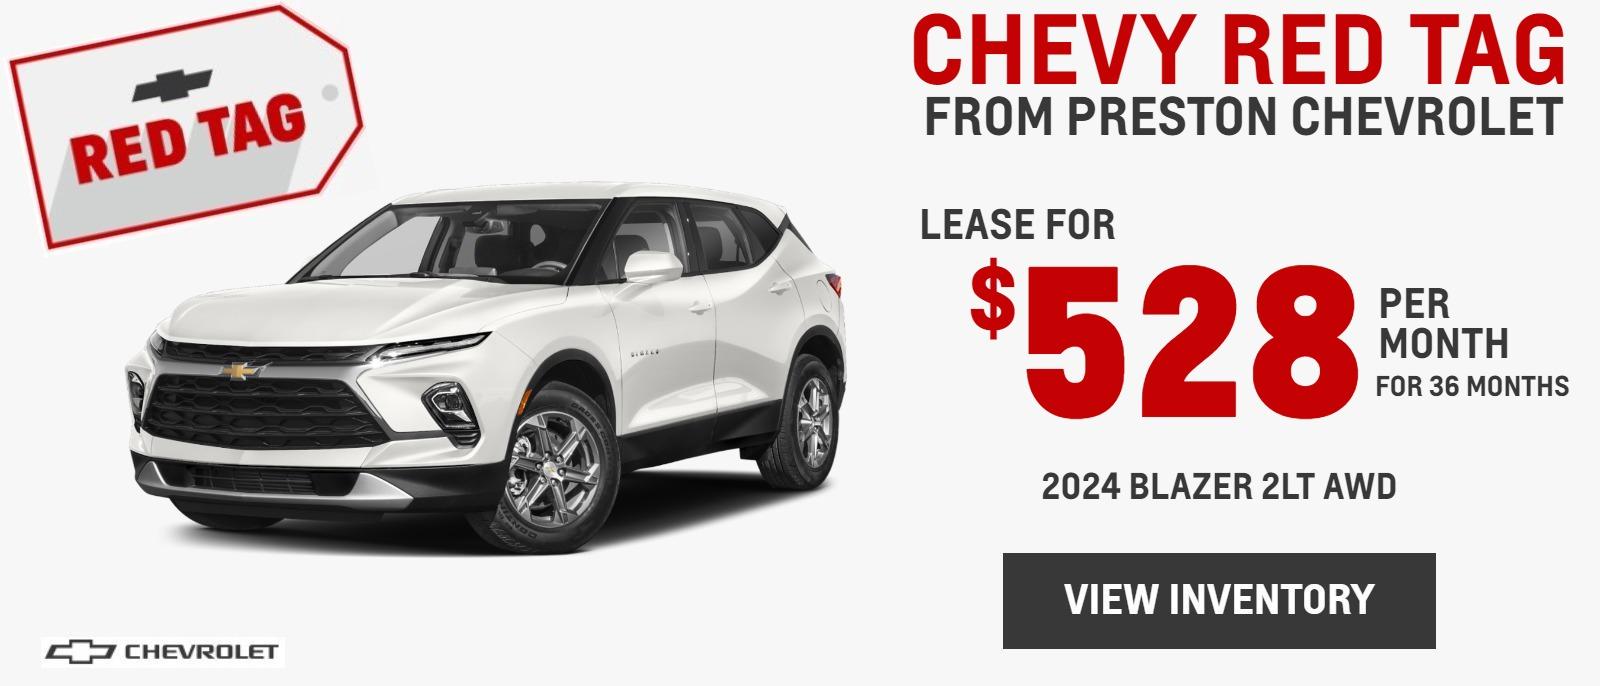 (230258) LEASE A 2024 BLAZER LT AWD FOR $528 PER MONTH FROM PRESTON CHEVROLET IN BURTON, OH